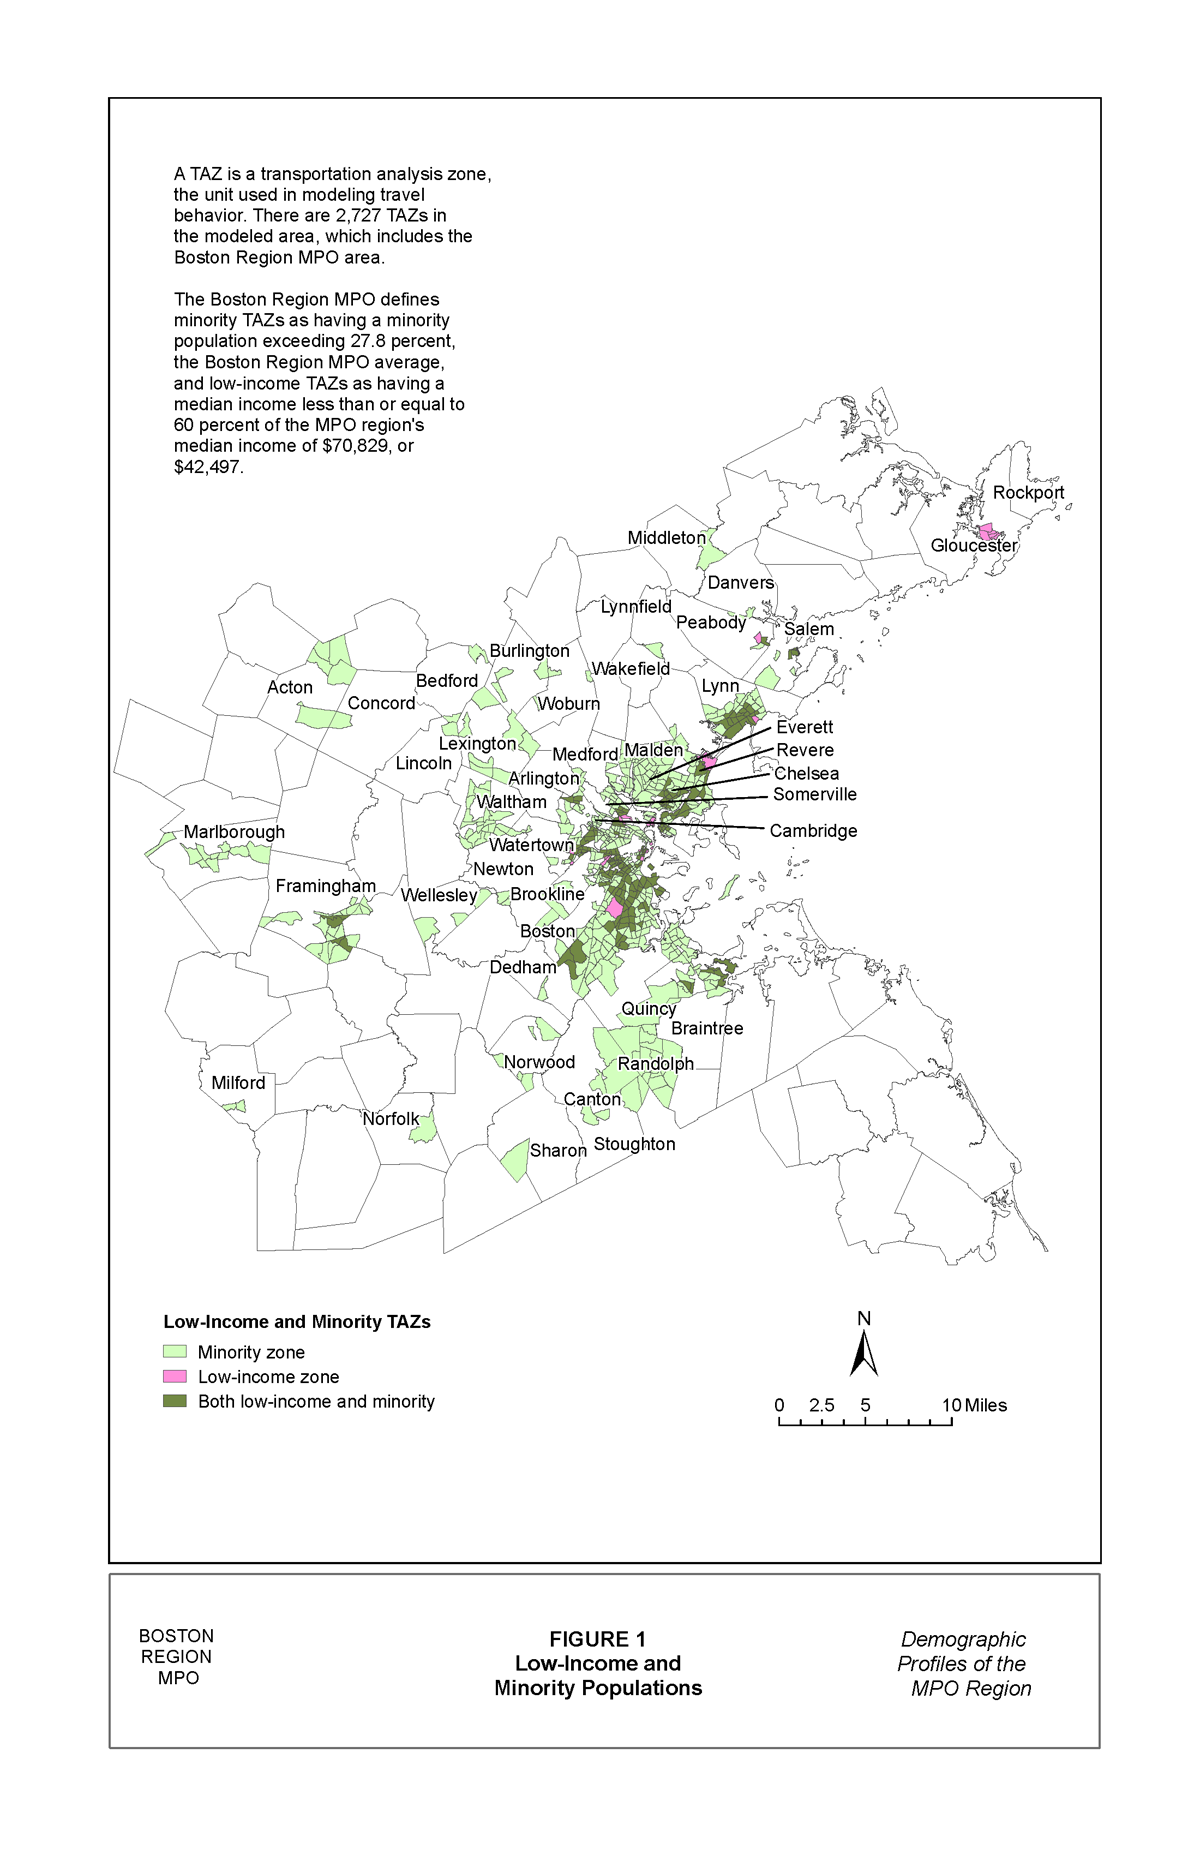 Figure 1 is a map that identifies low-income and minority transportation analysis zones in the Boston Region MPO area.